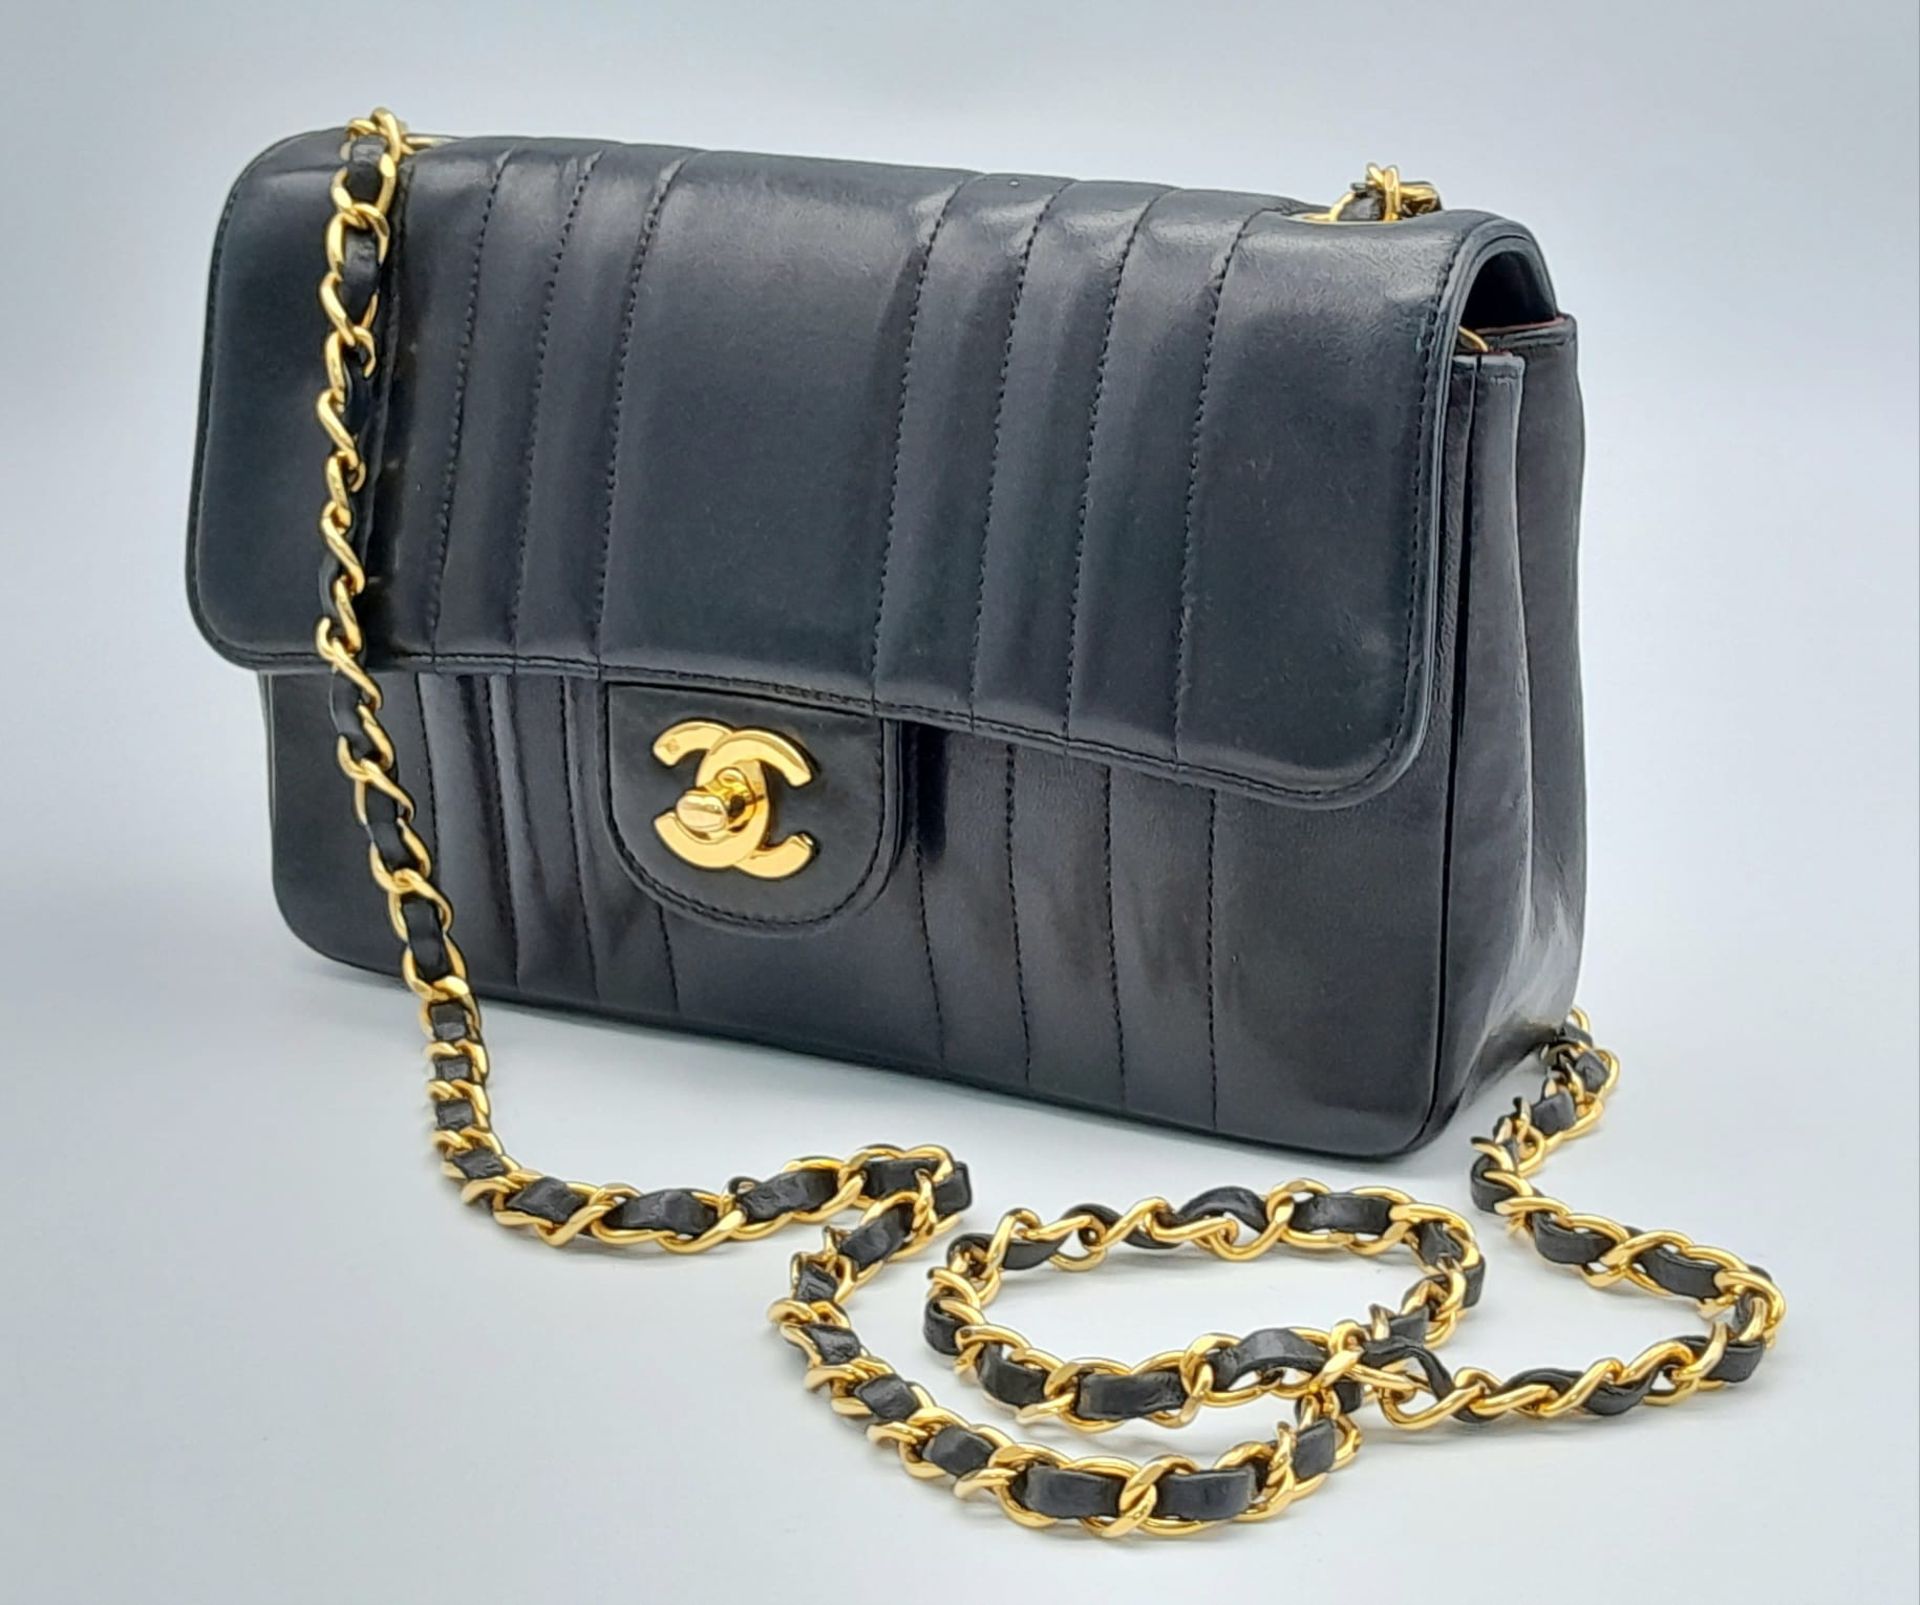 An Early 1990s Chanel Mademoiselle Classic Flap Chain Bag. Black lambskin leather. Gold plated